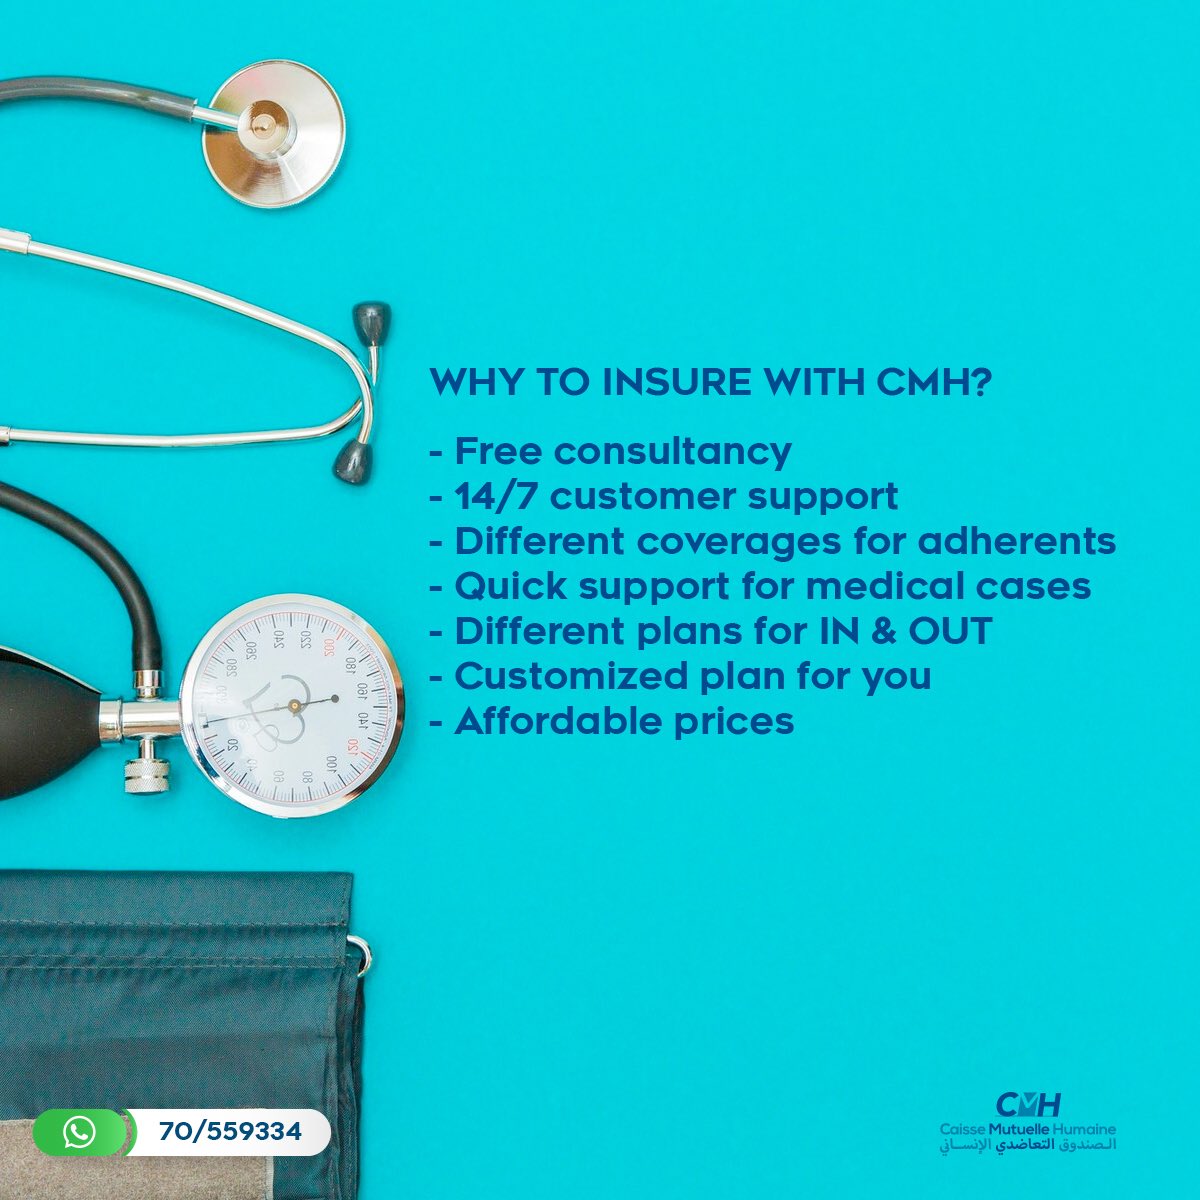 #CMH #health #personalplanner #insuranceplans #insuranceplanning #insuranceservices 

Why to insure with CMH?
It is always a good decision to make it.

#medical #insurance #health #livelovelebanon #lebanon #healthcare #caissemutuellehumaine #hospital #hospitalcare #IN_Plan